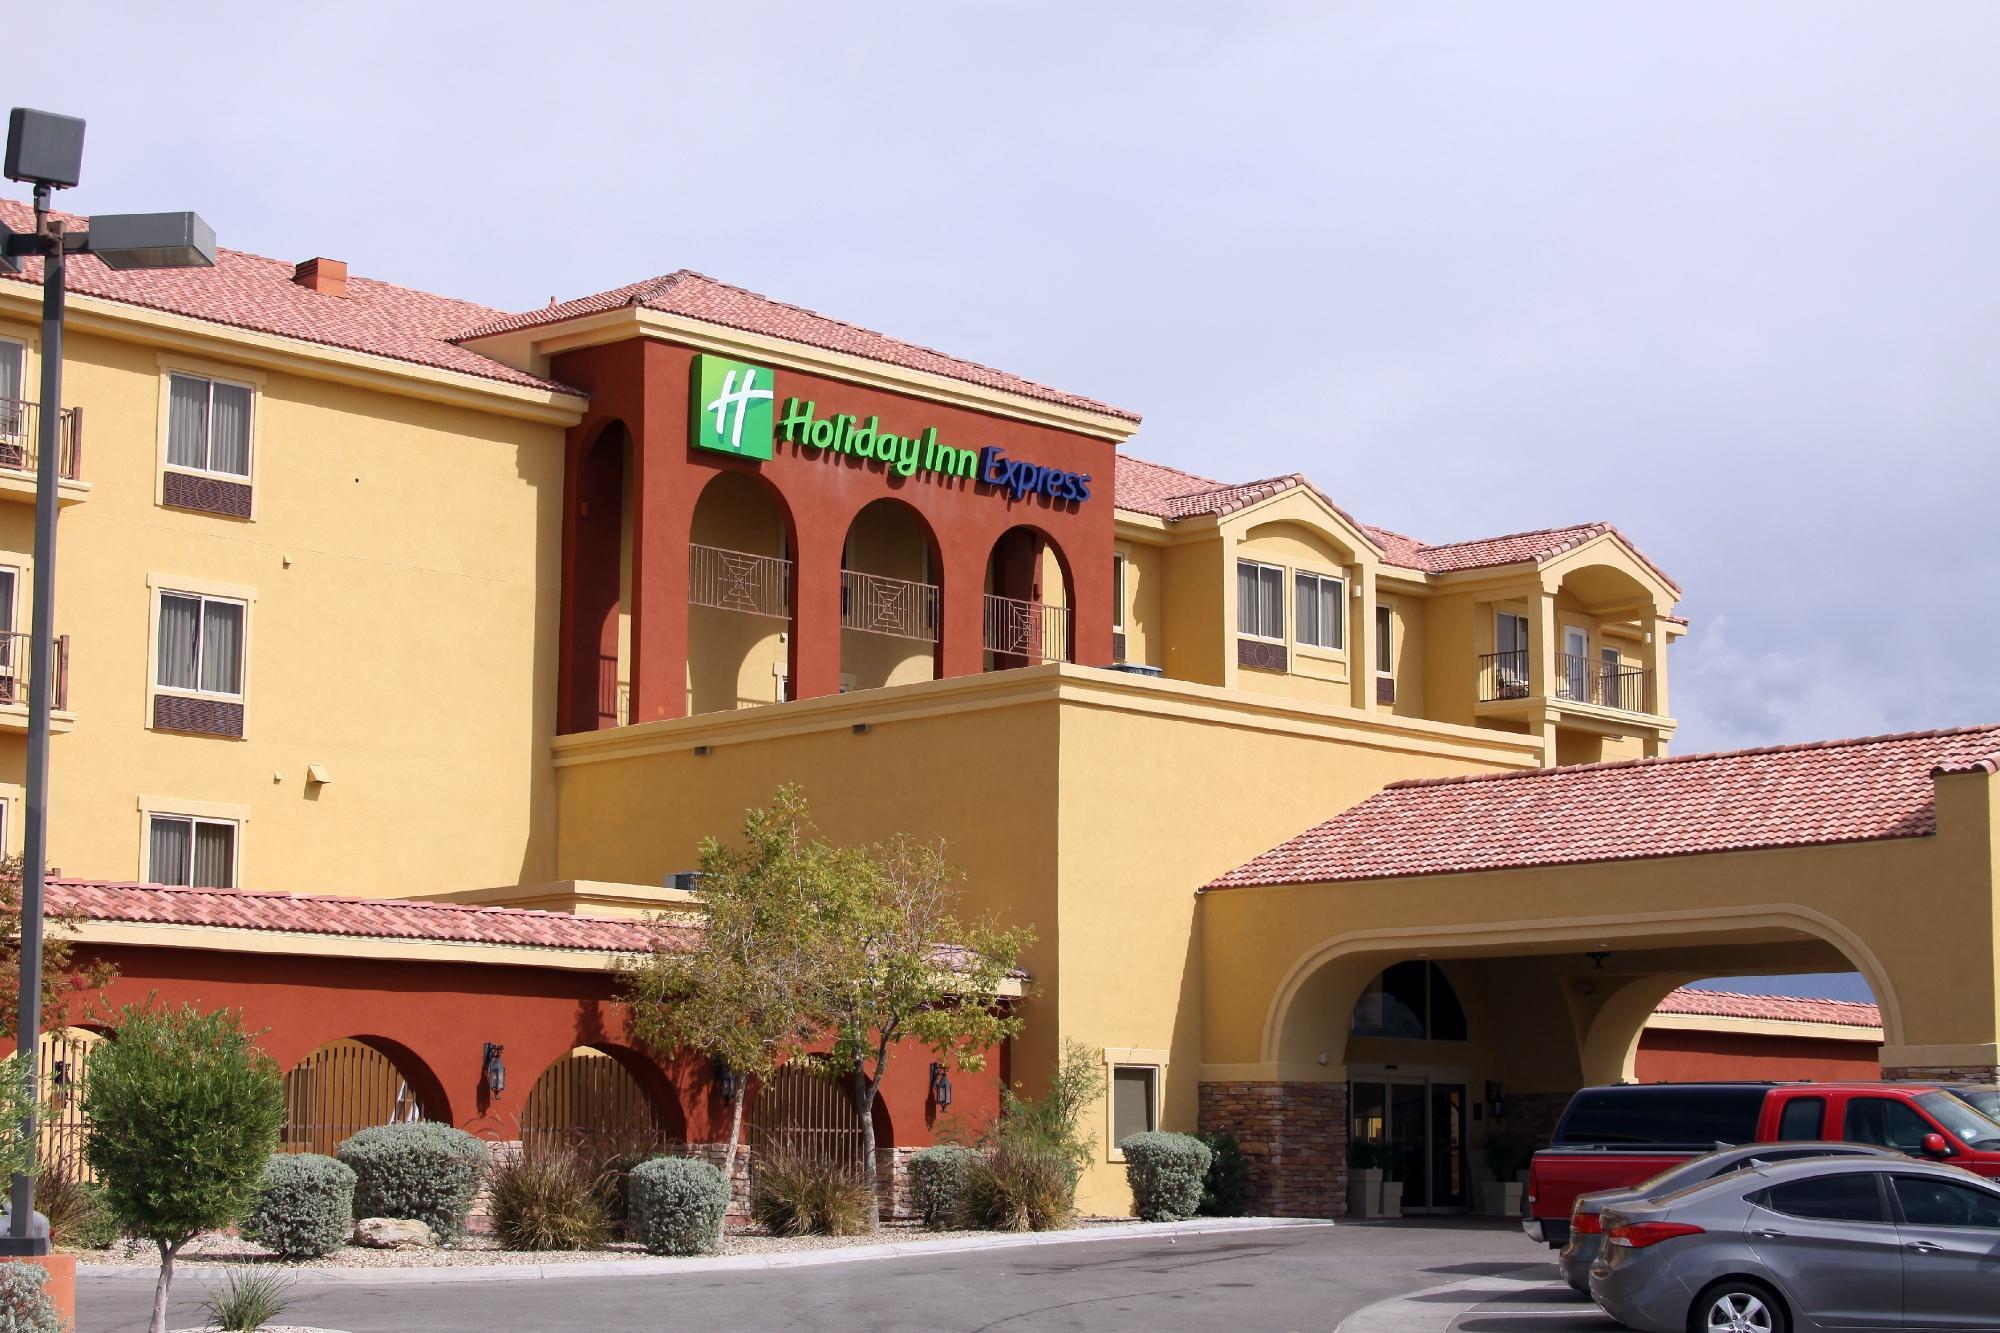 Photo of Holiday Inn Express & Suites Mesquite, Mesquite, NV